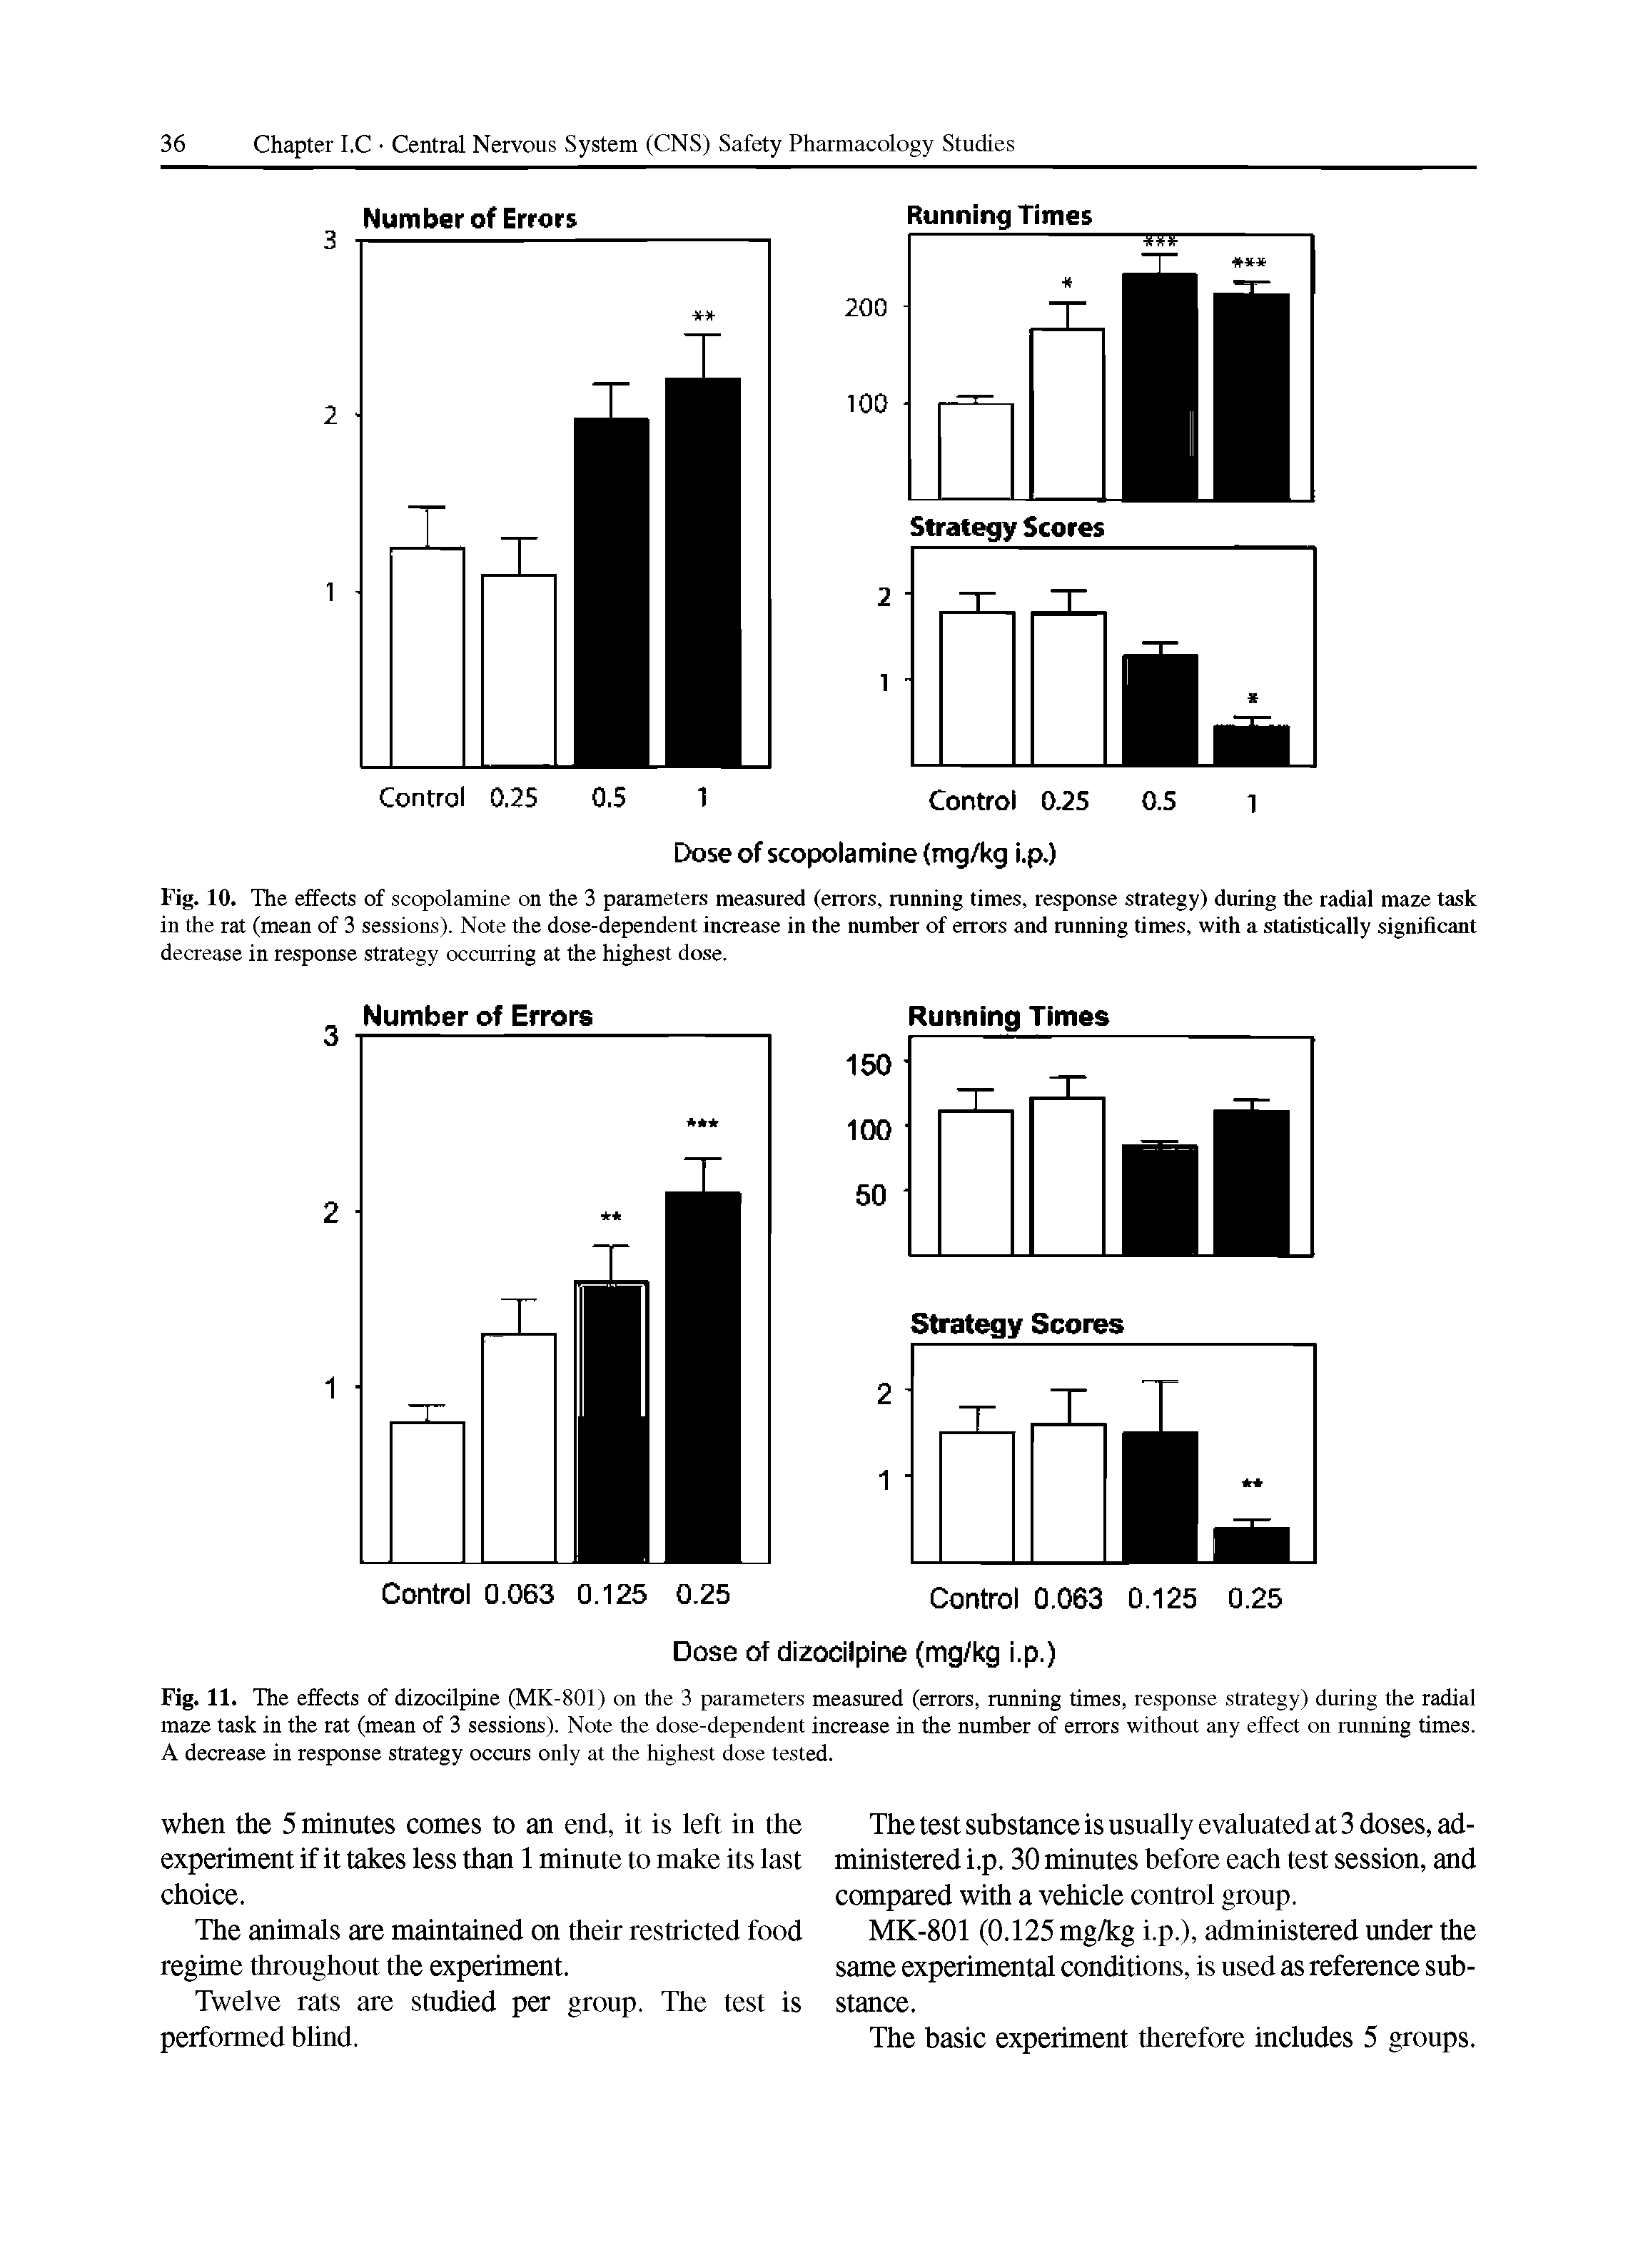 Fig. 11. The effects of dizocilpine (MK-801) on the 3 parameters measured (errors, running times, response strategy) during the radial maze task in the rat (mean of 3 sessions). Note the dose-dependent increase in the number of errors without any effect on running times. A decrease in response strategy occurs only at the highest dose tested.